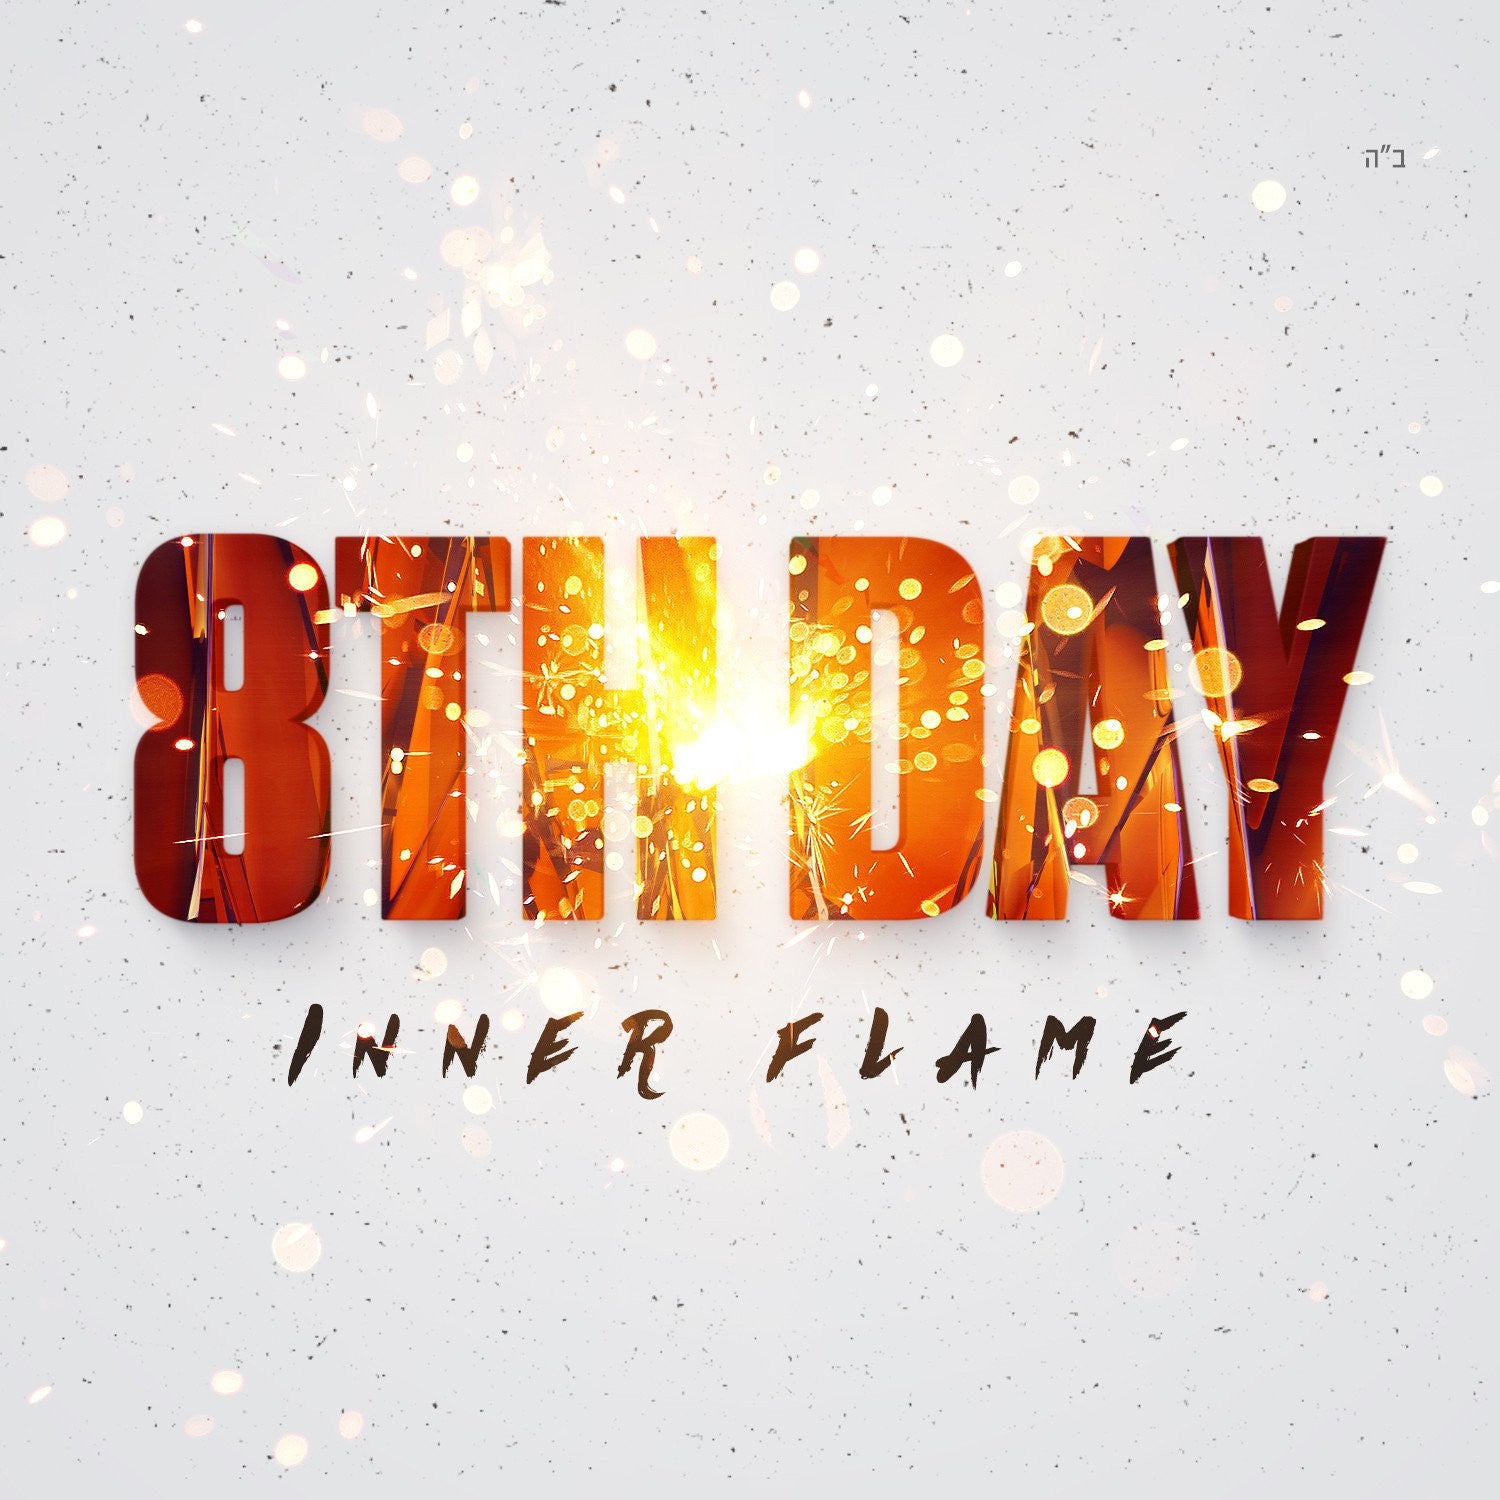 Test 8th Day - Inner Flame